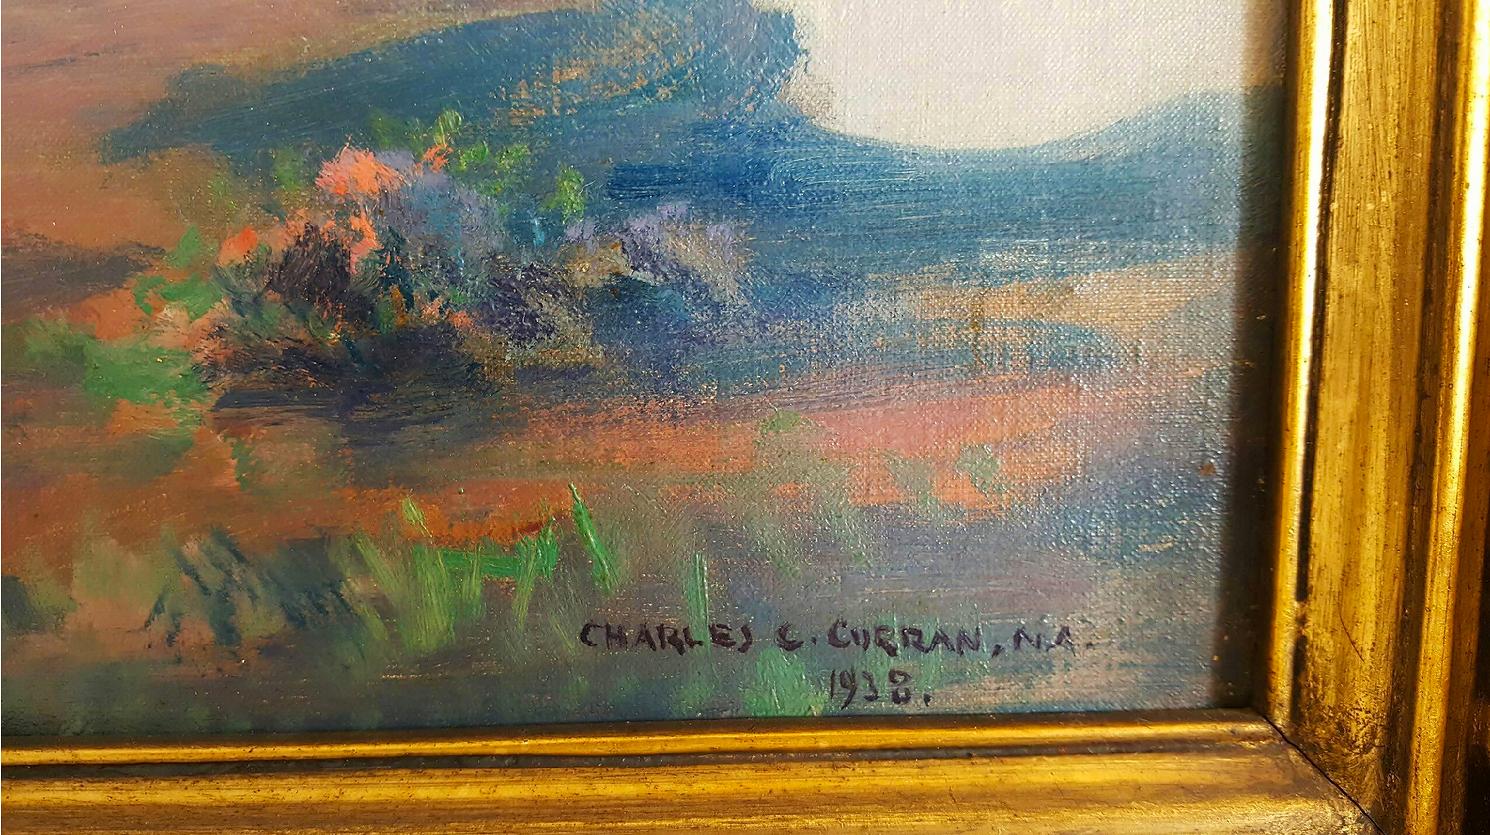 charles courtney curran paintings for sale